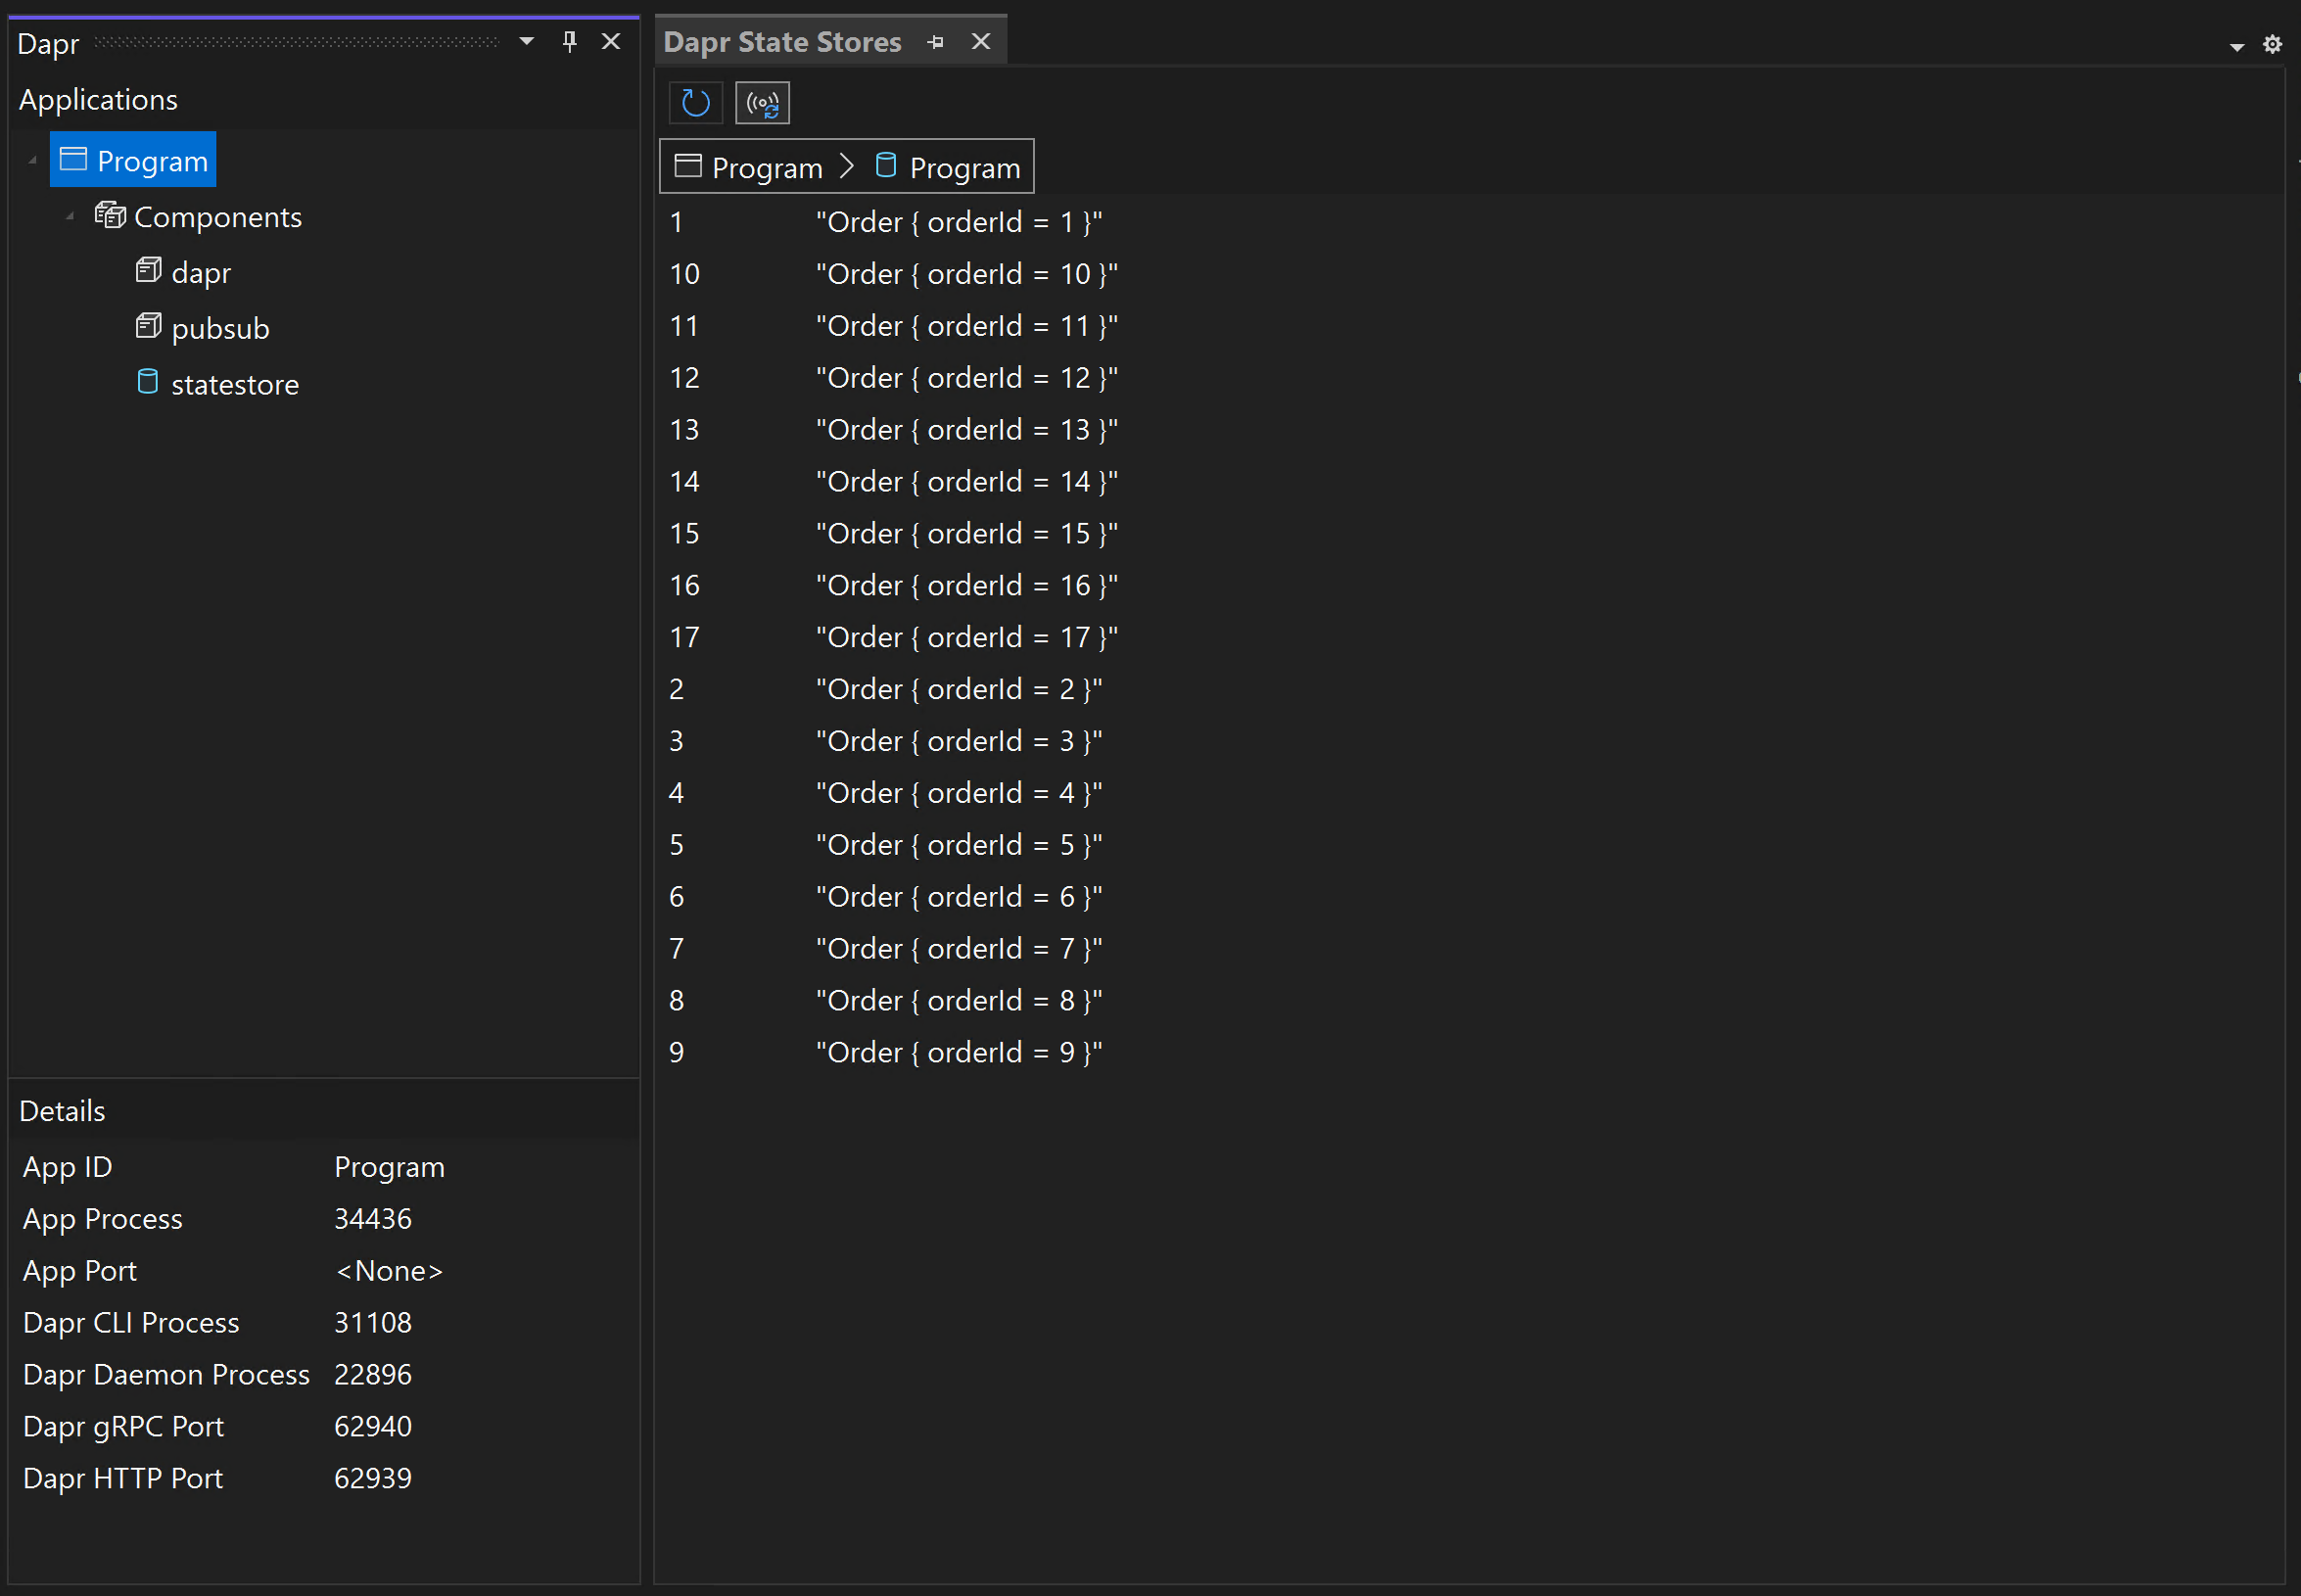 Screenshot of Visual Studio with the Dapr and Dapr State Stores tool windows open.